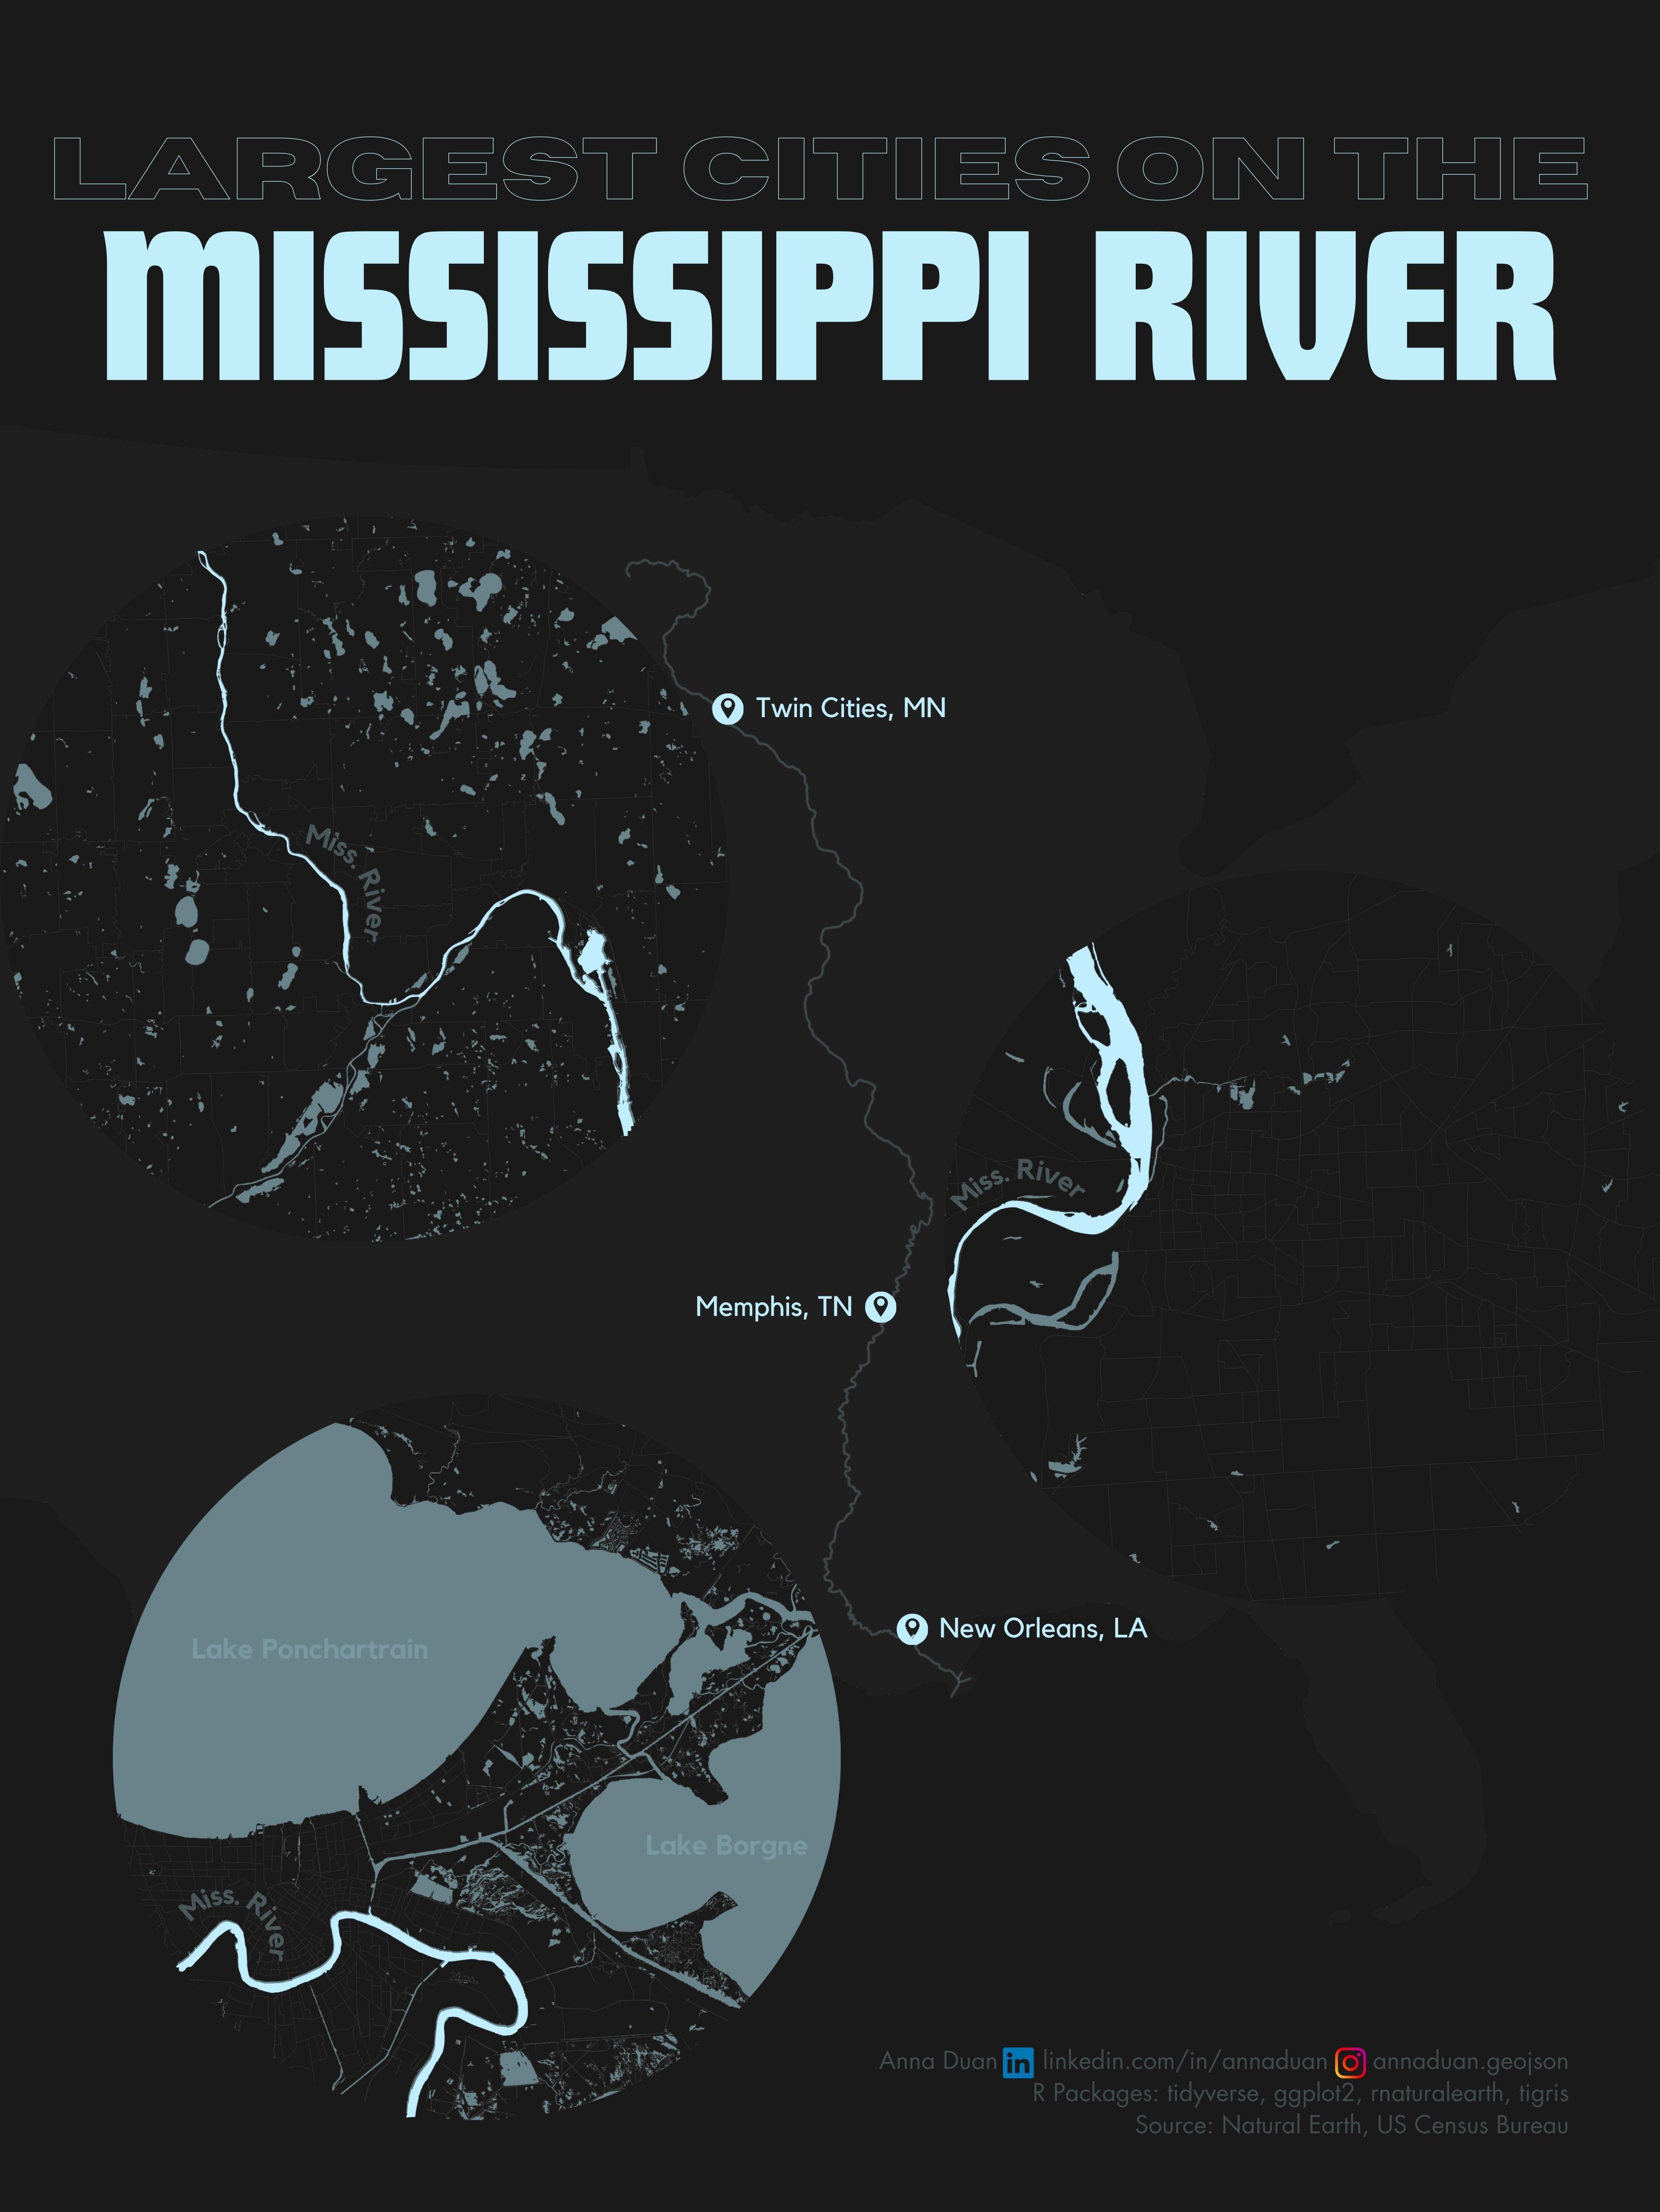 Thumbnail image of Biggest cities on the Mississippi River by Anna Duan